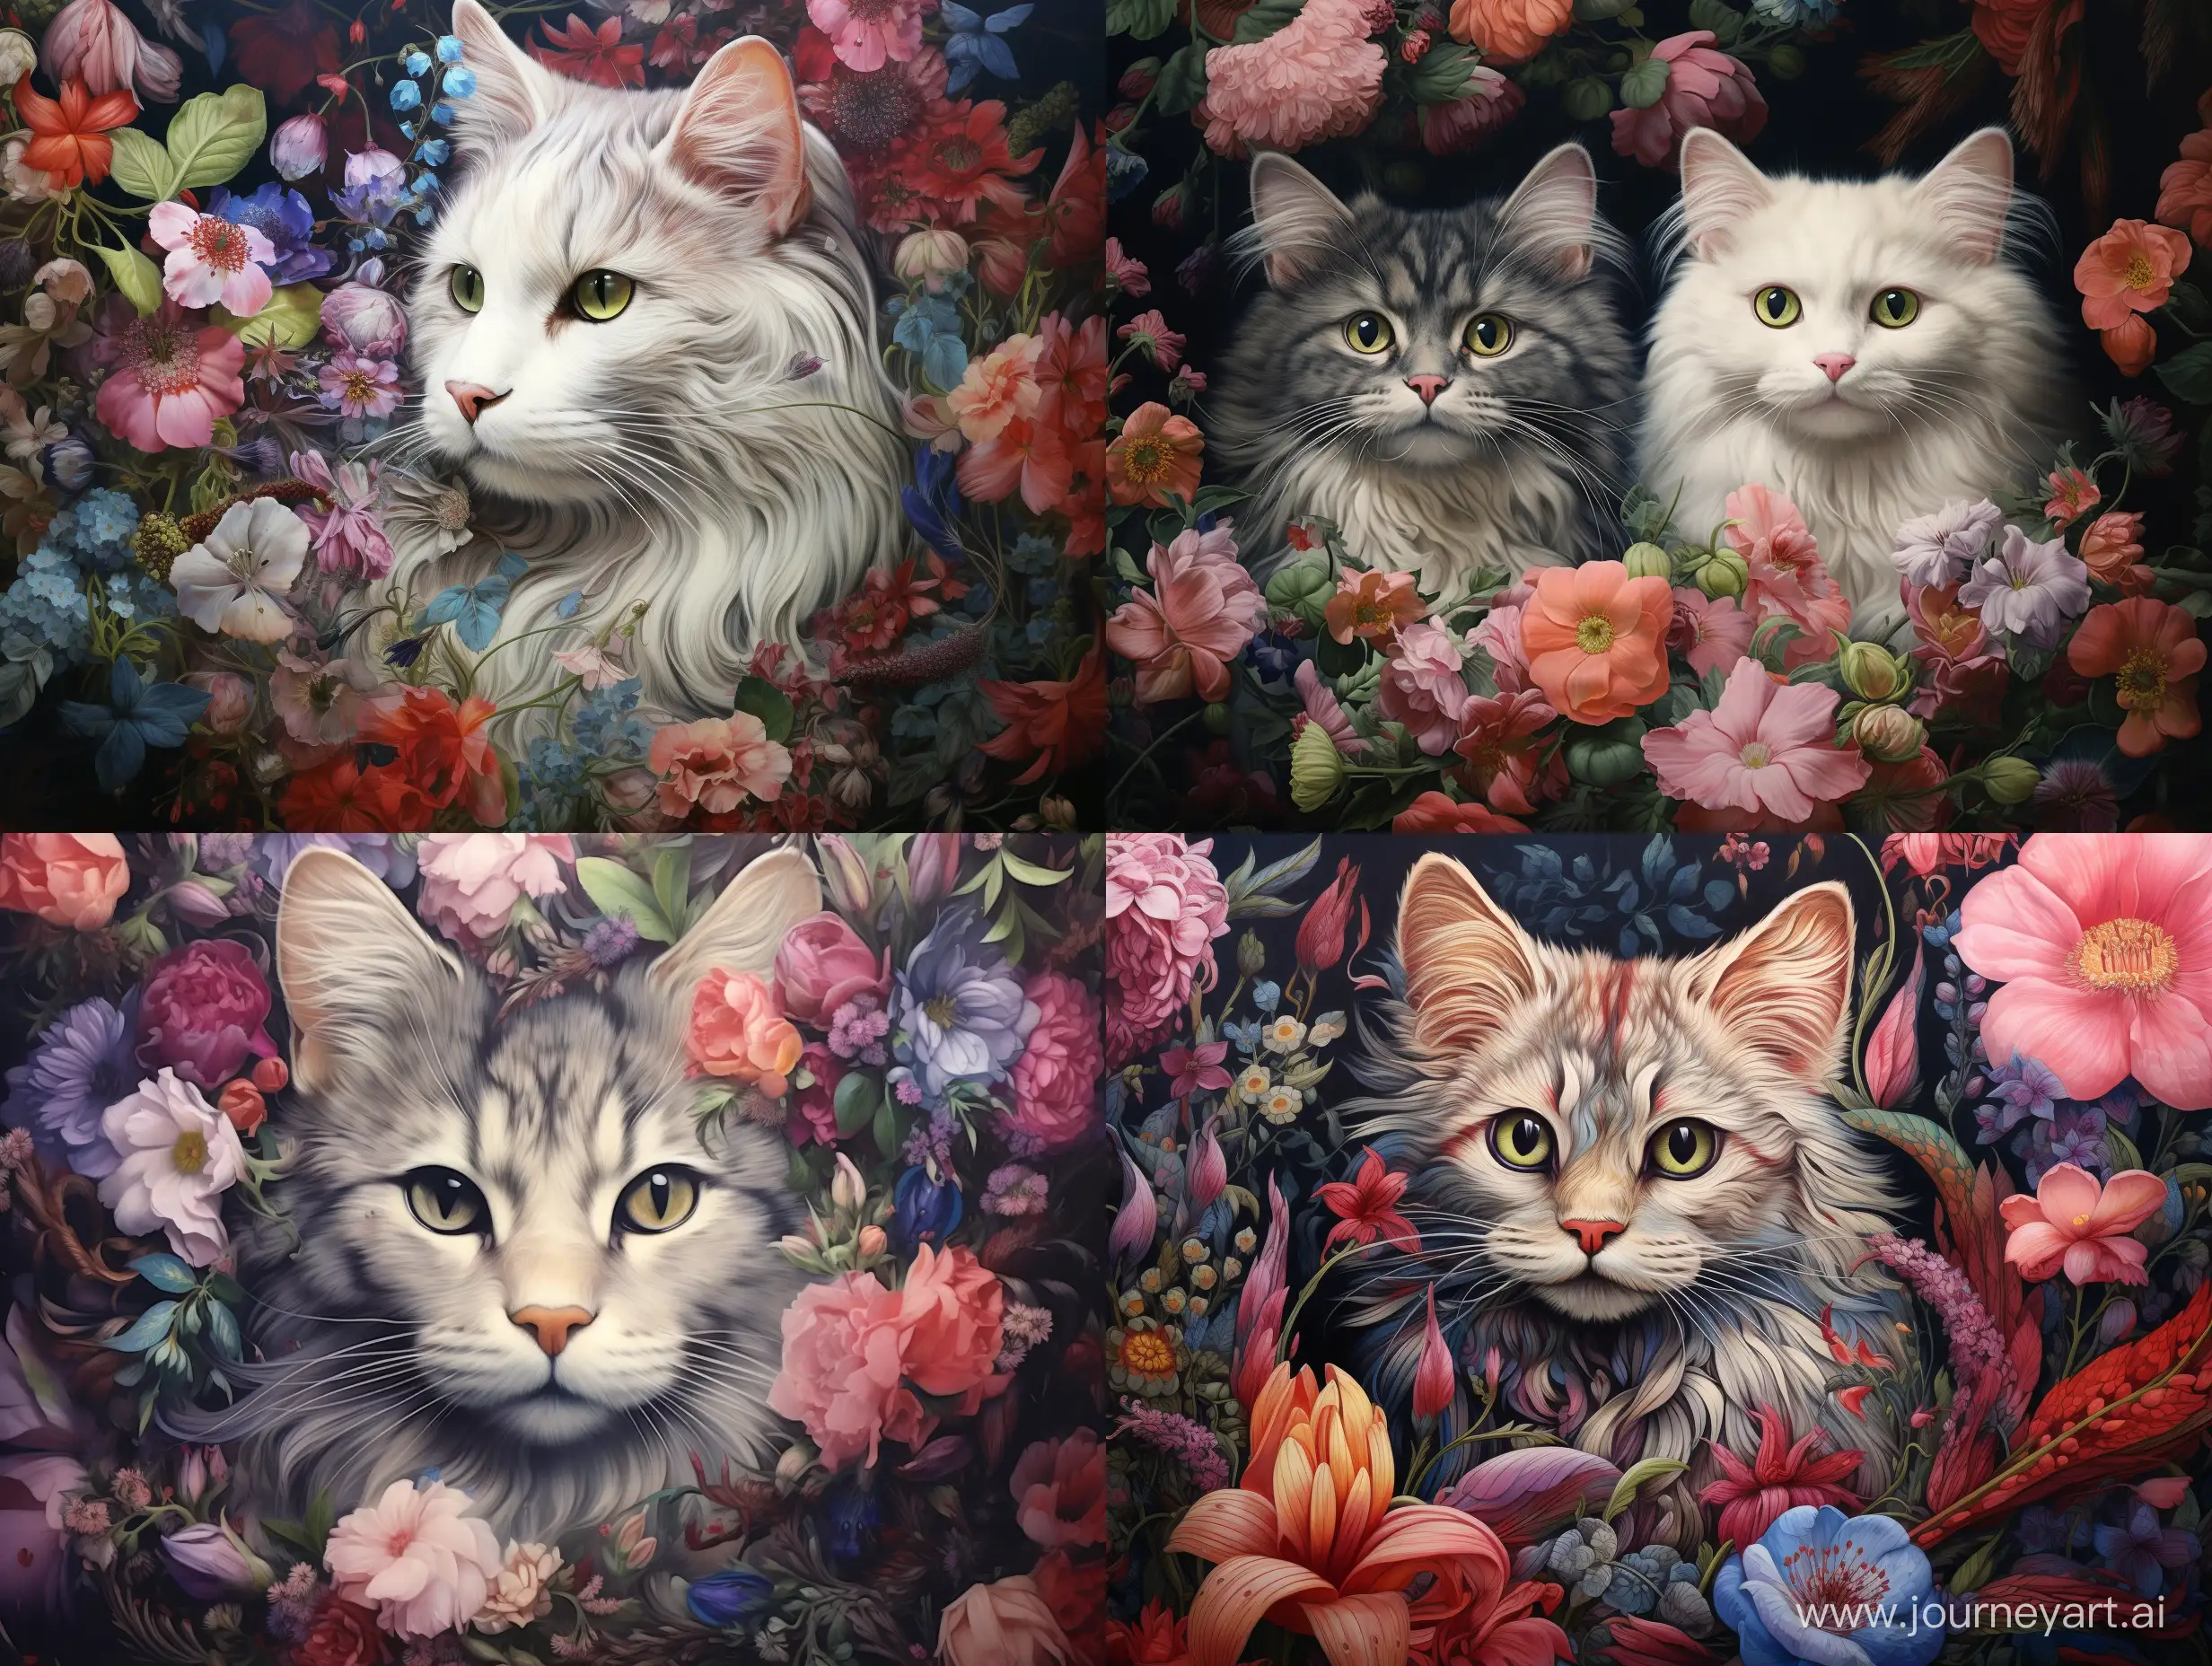 Exquisite-Cats-Surrounded-by-Flowers-and-Berries-in-Realistic-Detail